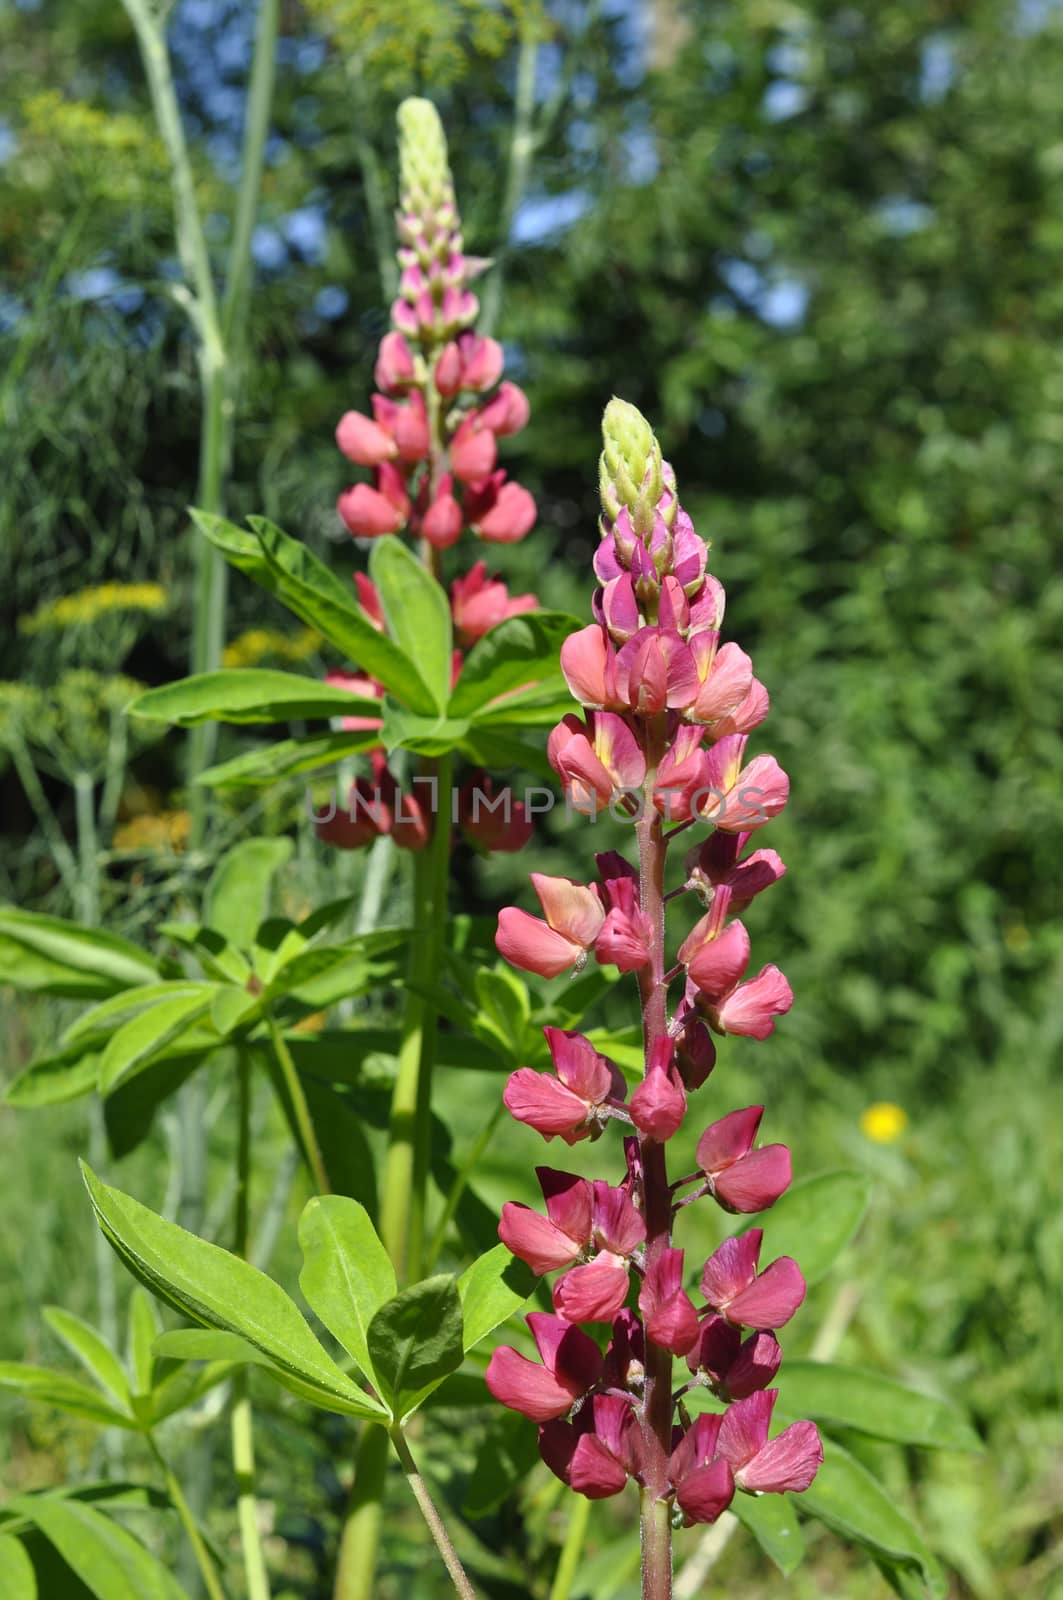 The blossoming pink lupine in a garden